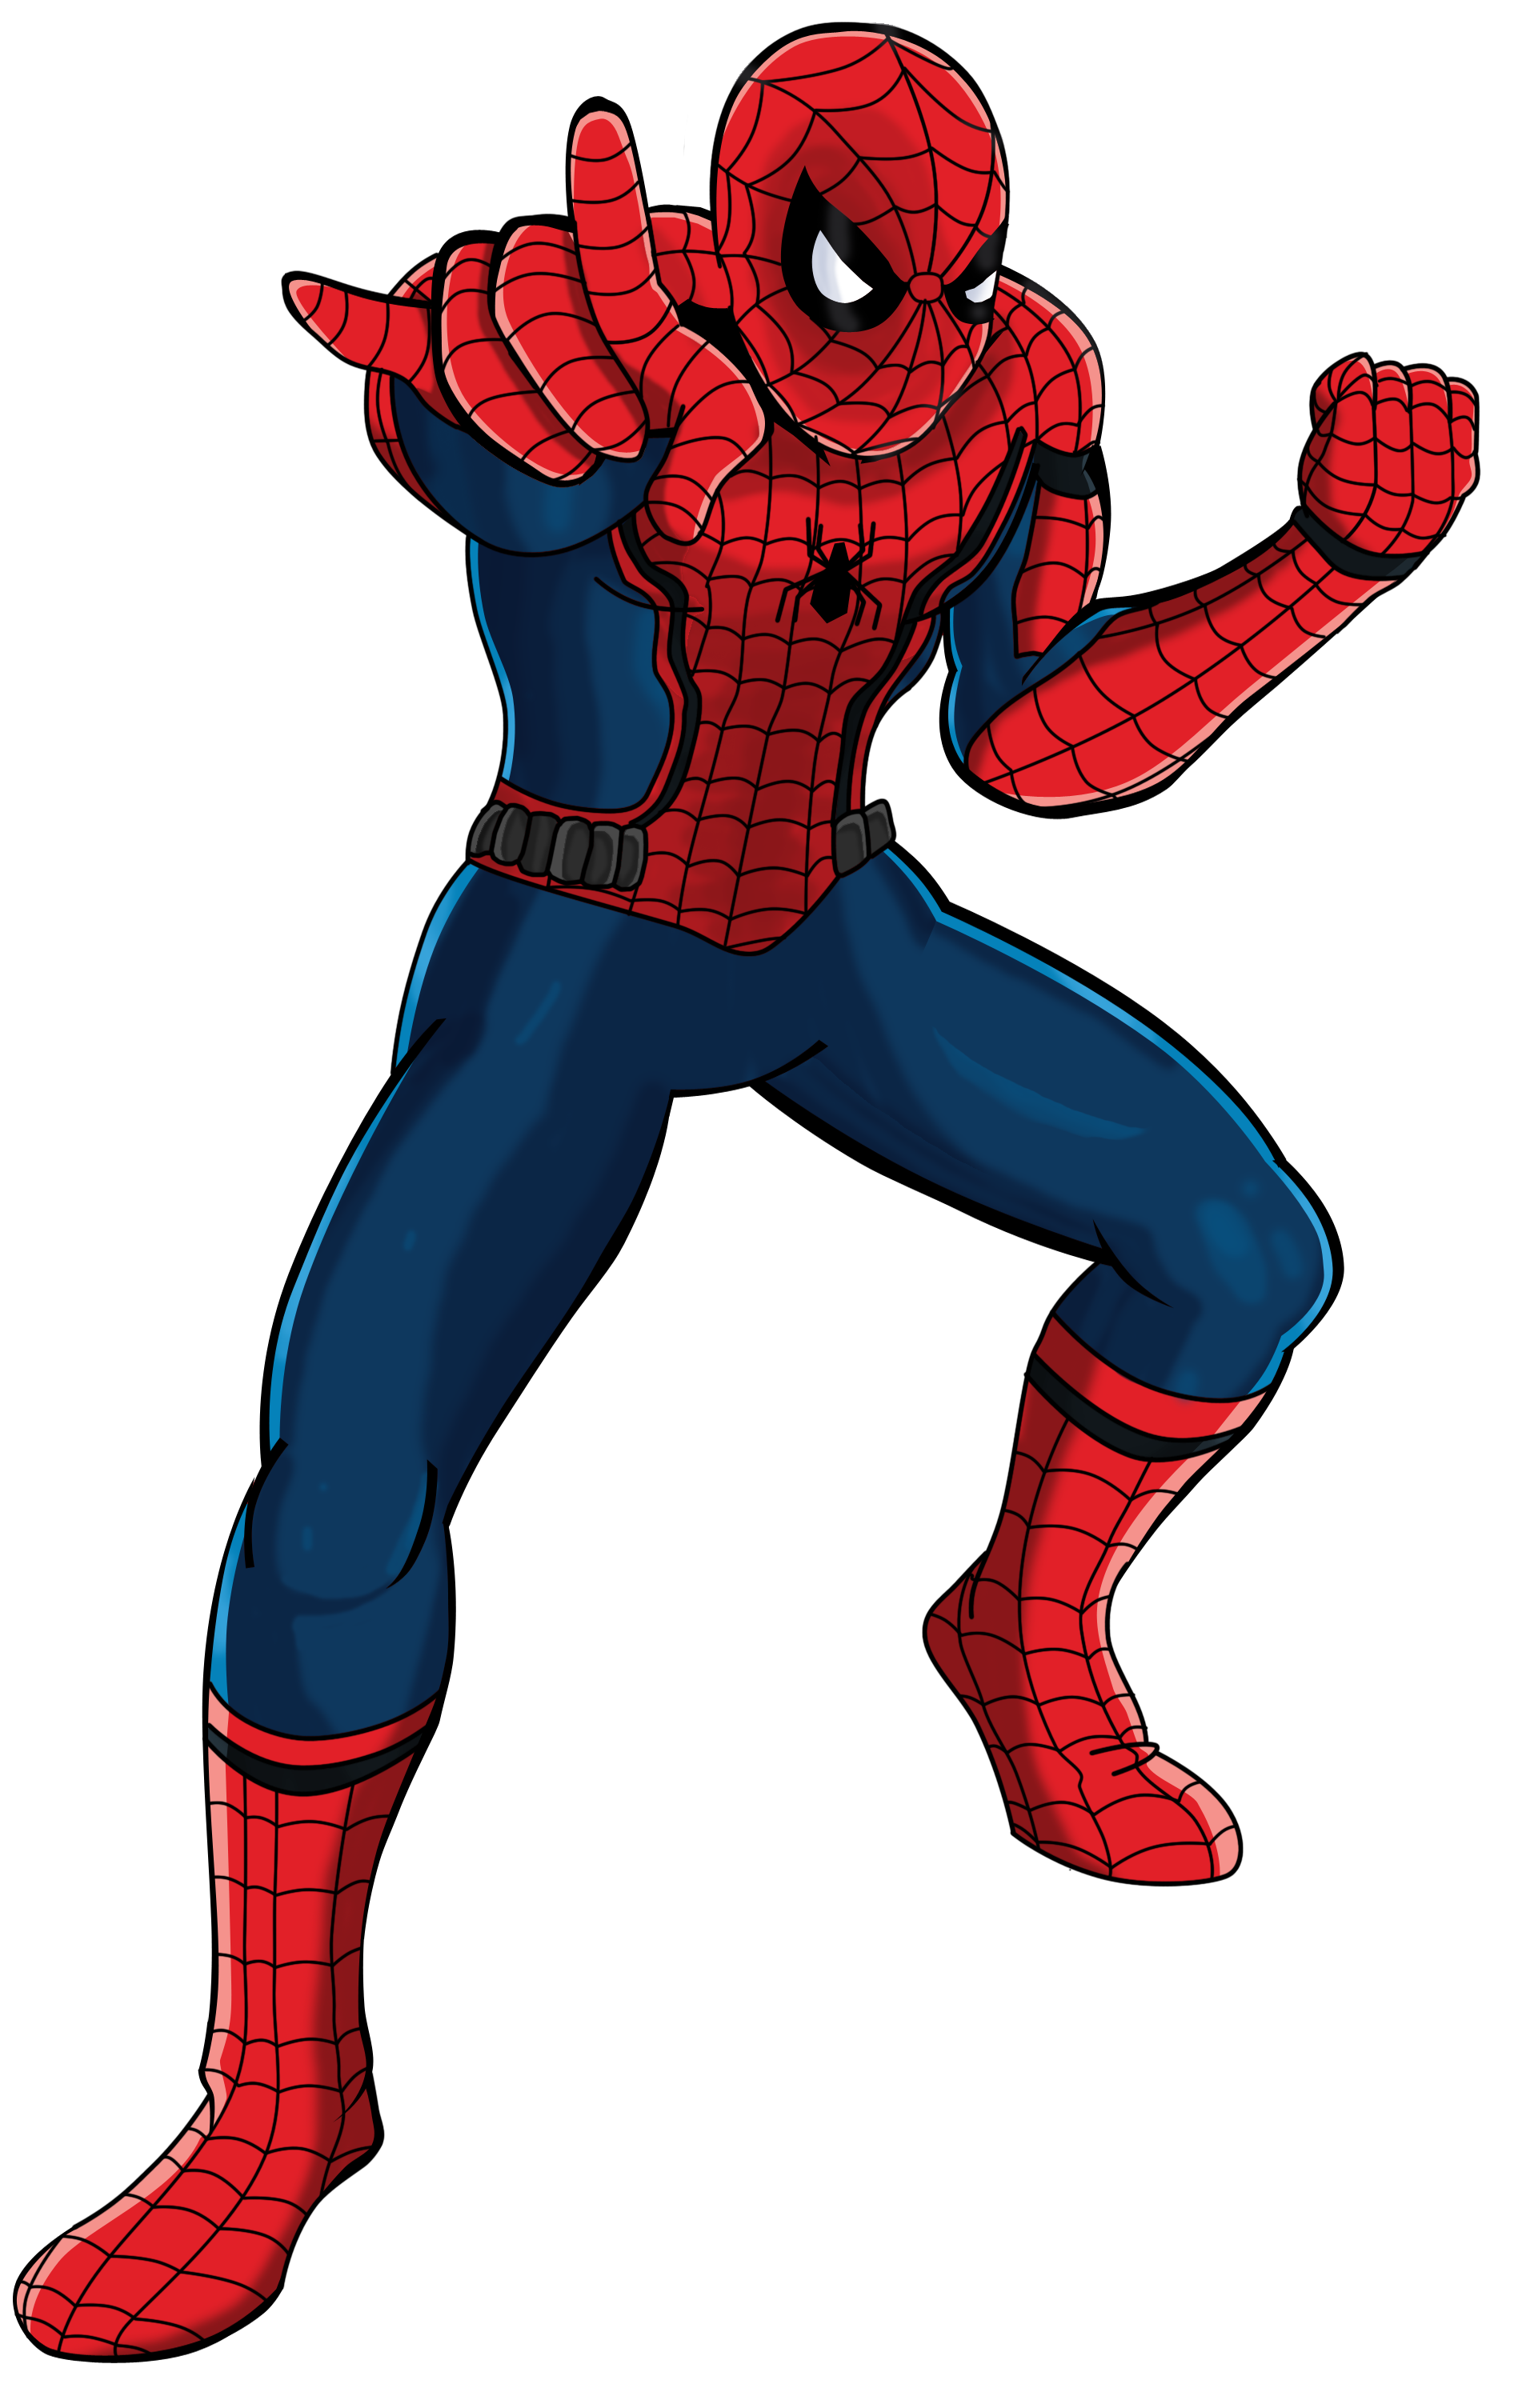 Can Spider-Man walk upright on the walls? - Quora